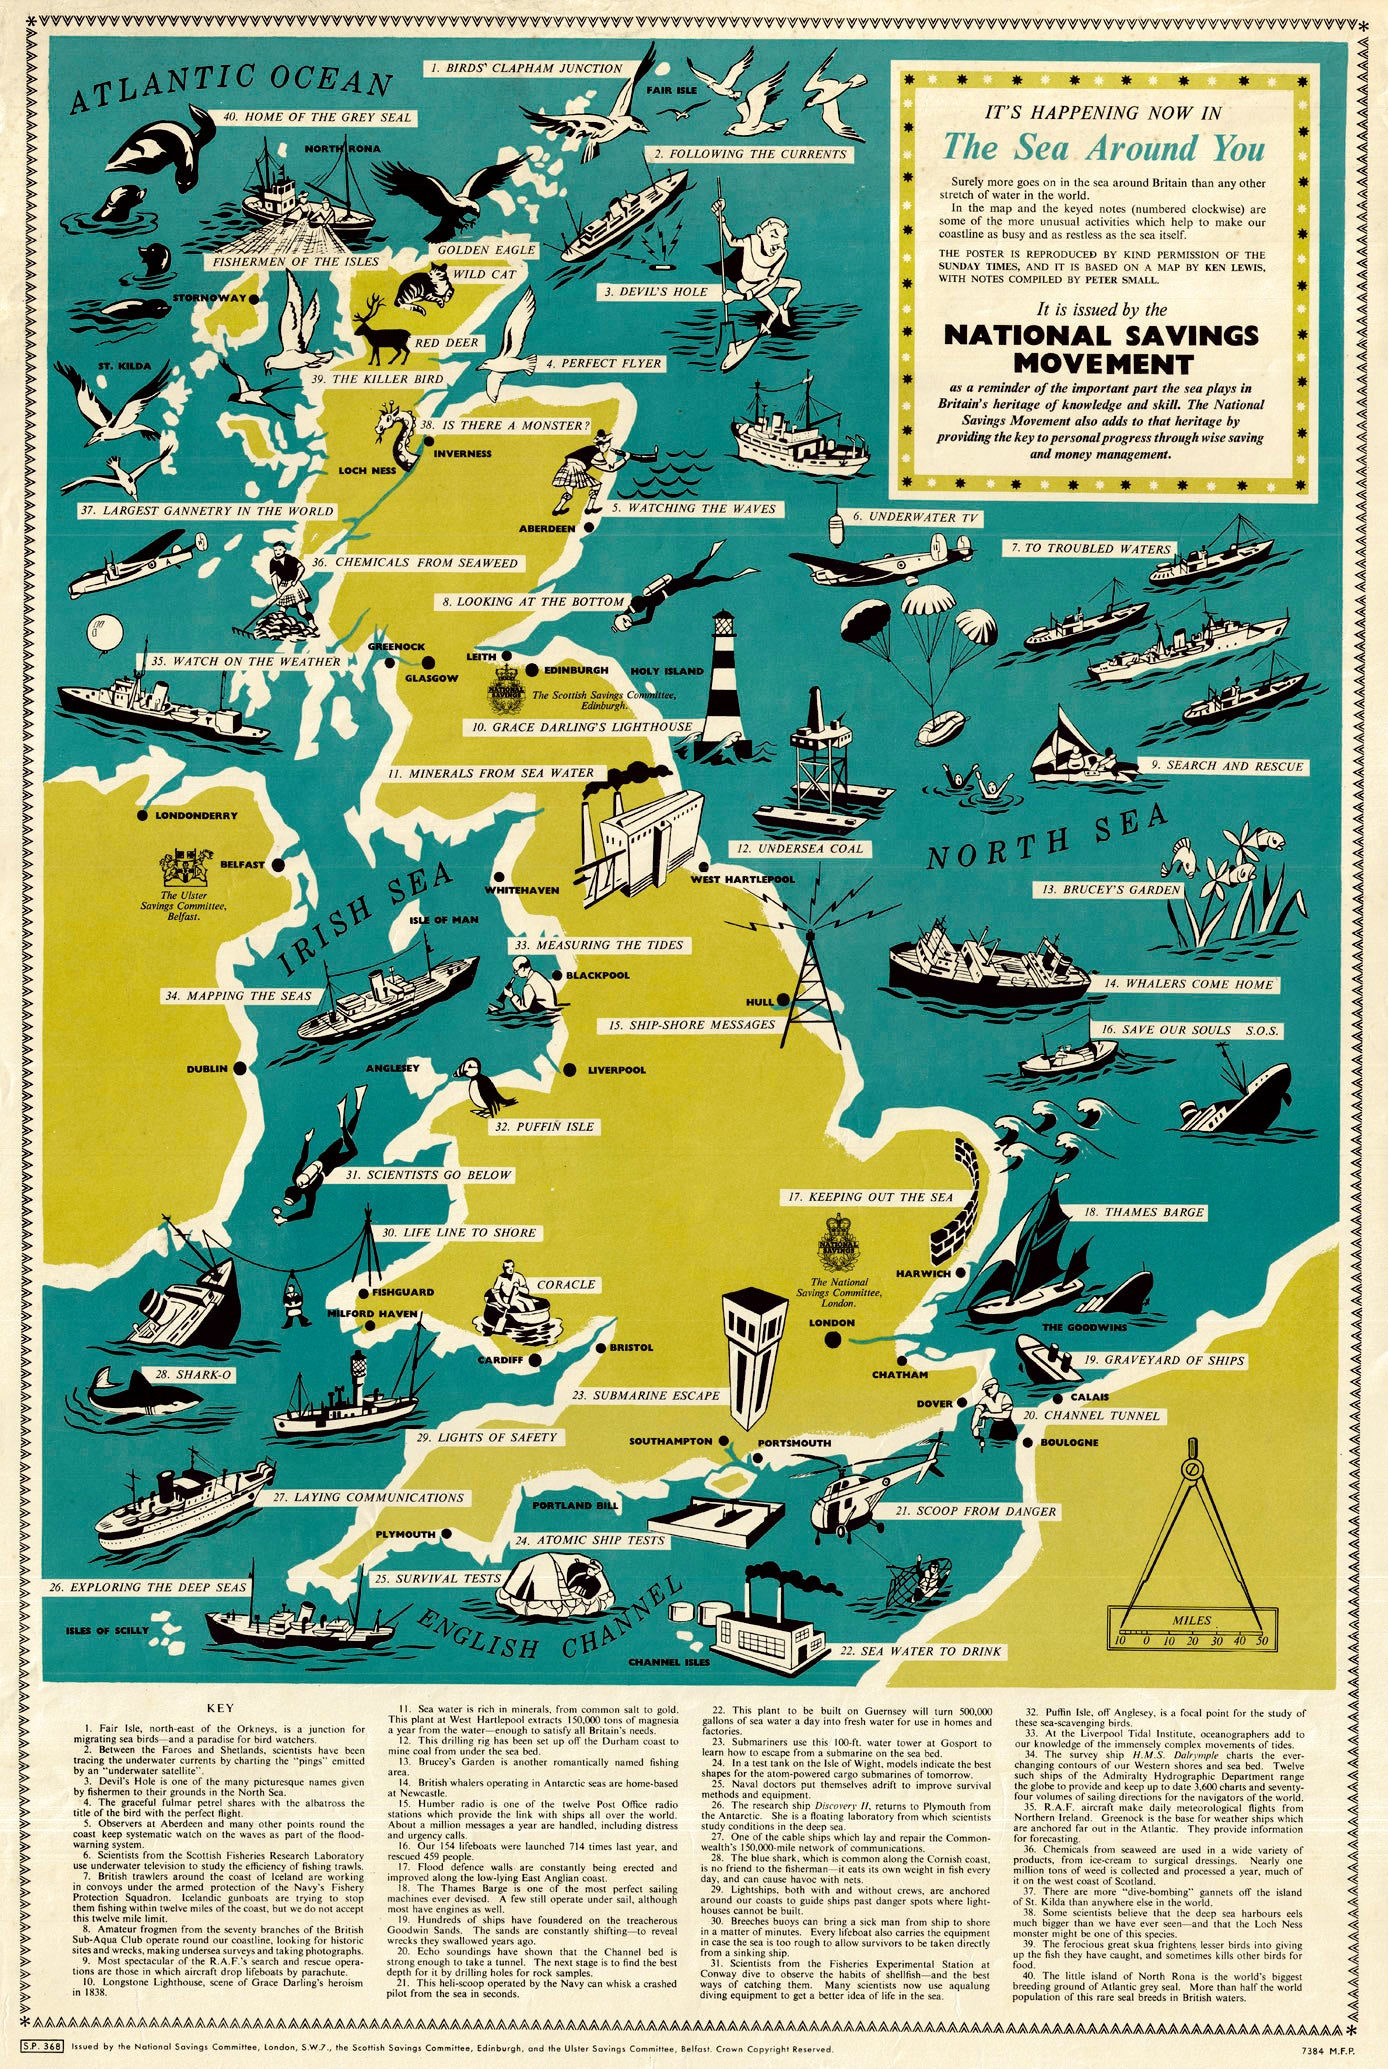 From the great Gannet kingdom in the western Isles of Scotland, down to the Scilly Isles off Cornwall, here are the great seas that envelope the nations and some of their future impact. Shows a wealth of new technologies for "Mapping The Seas", "Underwater TV", and even "Atomic Ship Tests" where"In a test tank on the Isle of Wight, models indicate the best shapes for the atom-powered cargo submarines of tomorrow. Does also show a driller near Dover noting the potential of a "Channel Tunnel" in the future